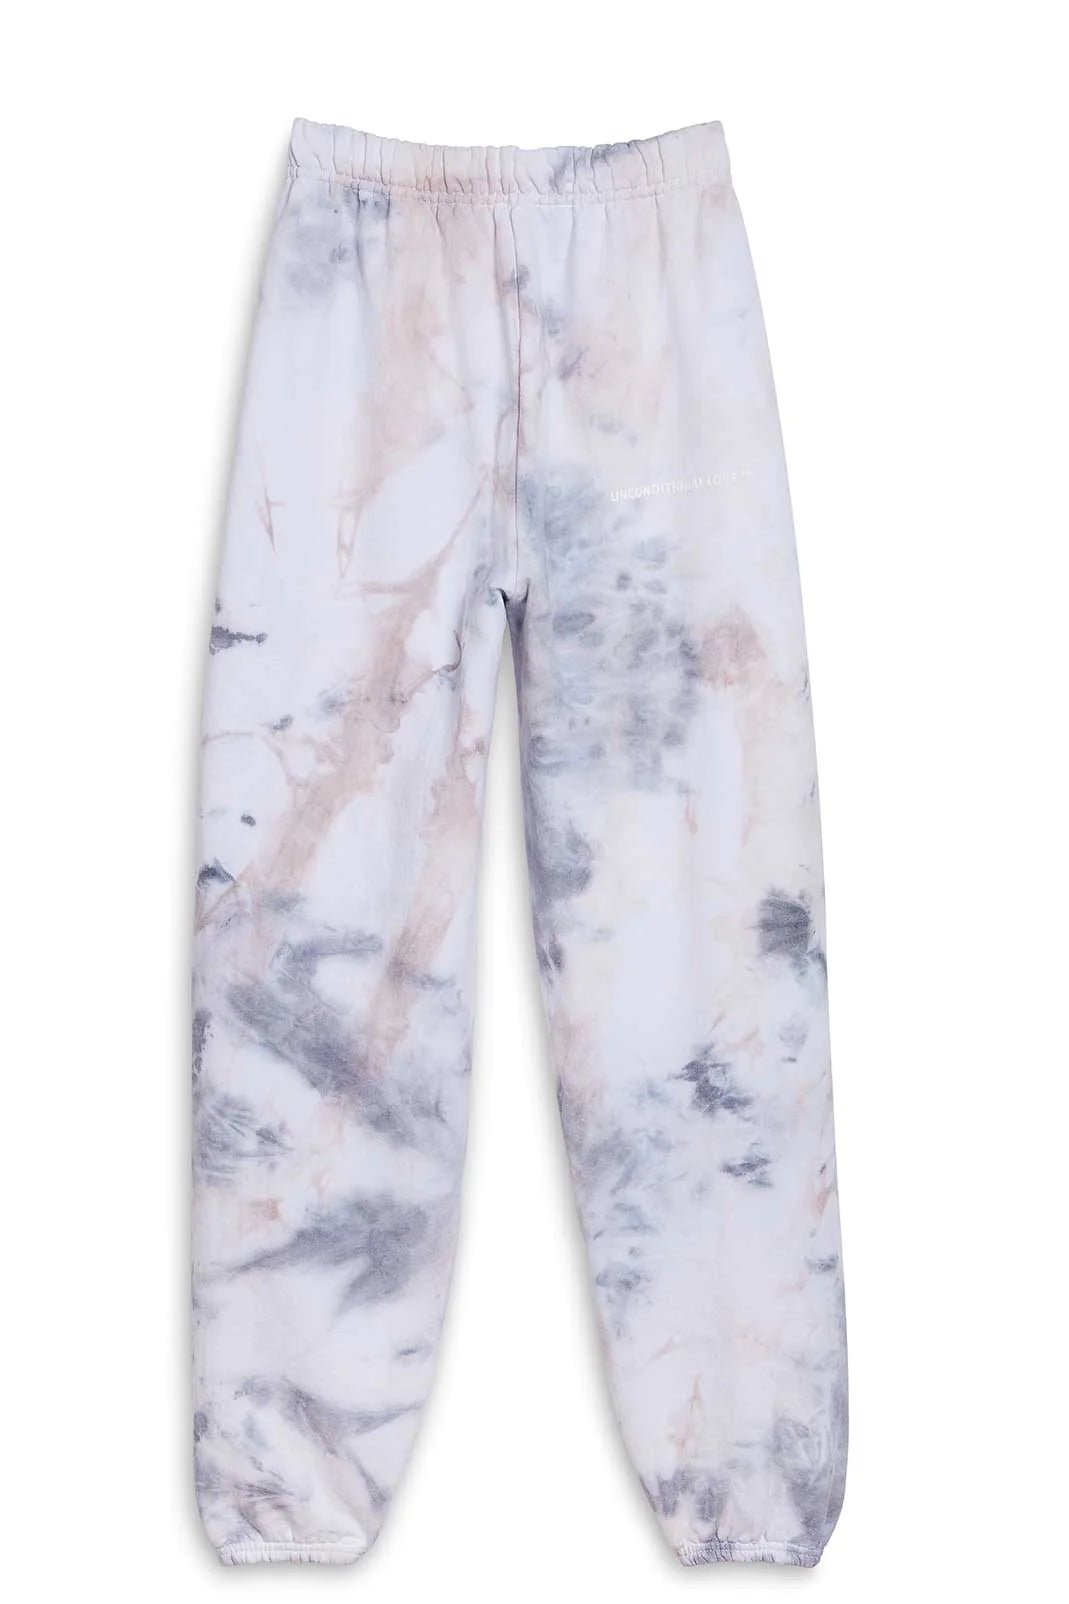 Unconditional Love Sweatpants (hand tie dye marbled) - Something about Sofia